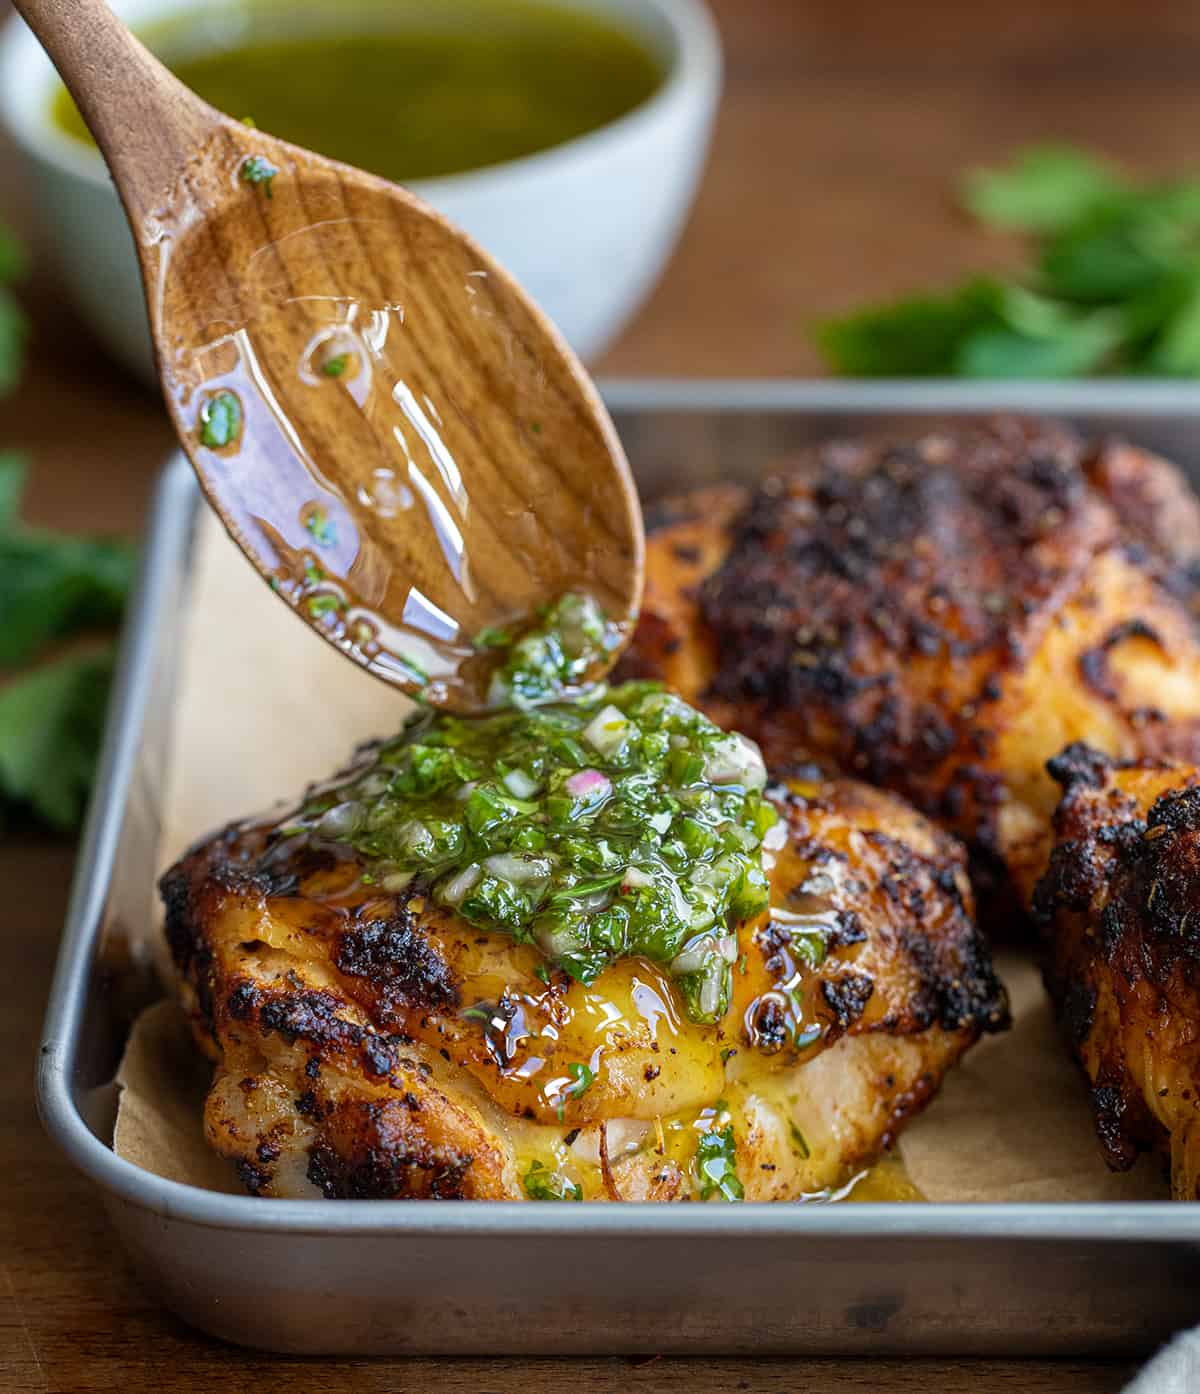 Drizzling chimichurri sauce over cooked chicken thighs.